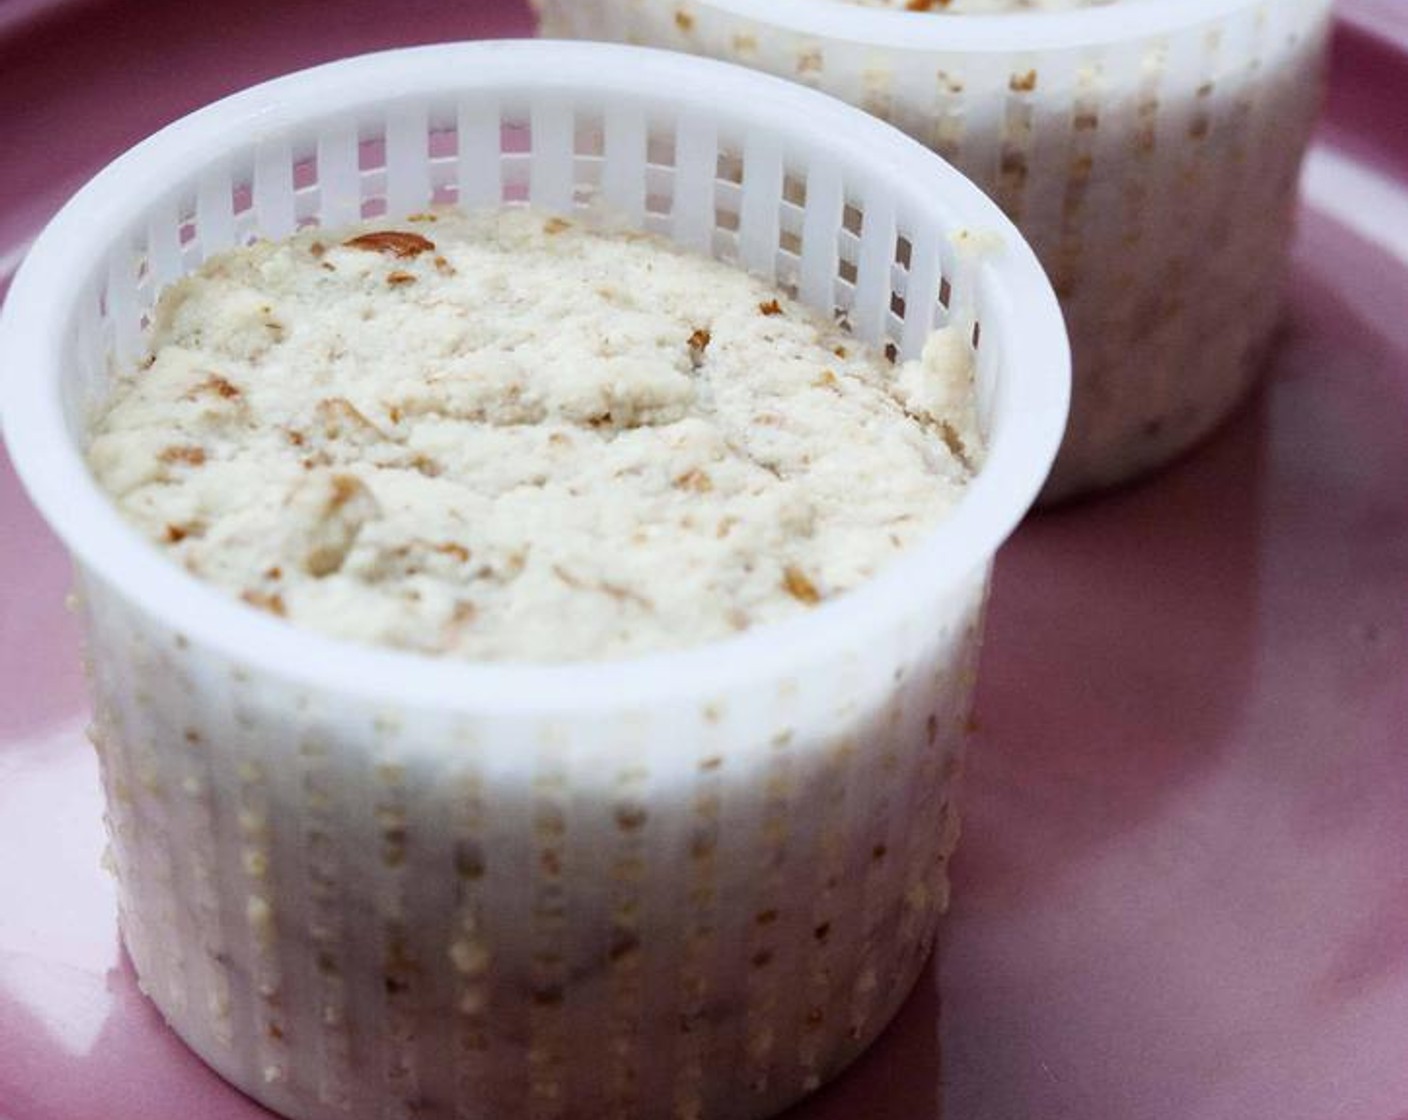 step 5 There you have it. Your vegan cheese is ready! Store it into your fridge for up to 5 days.